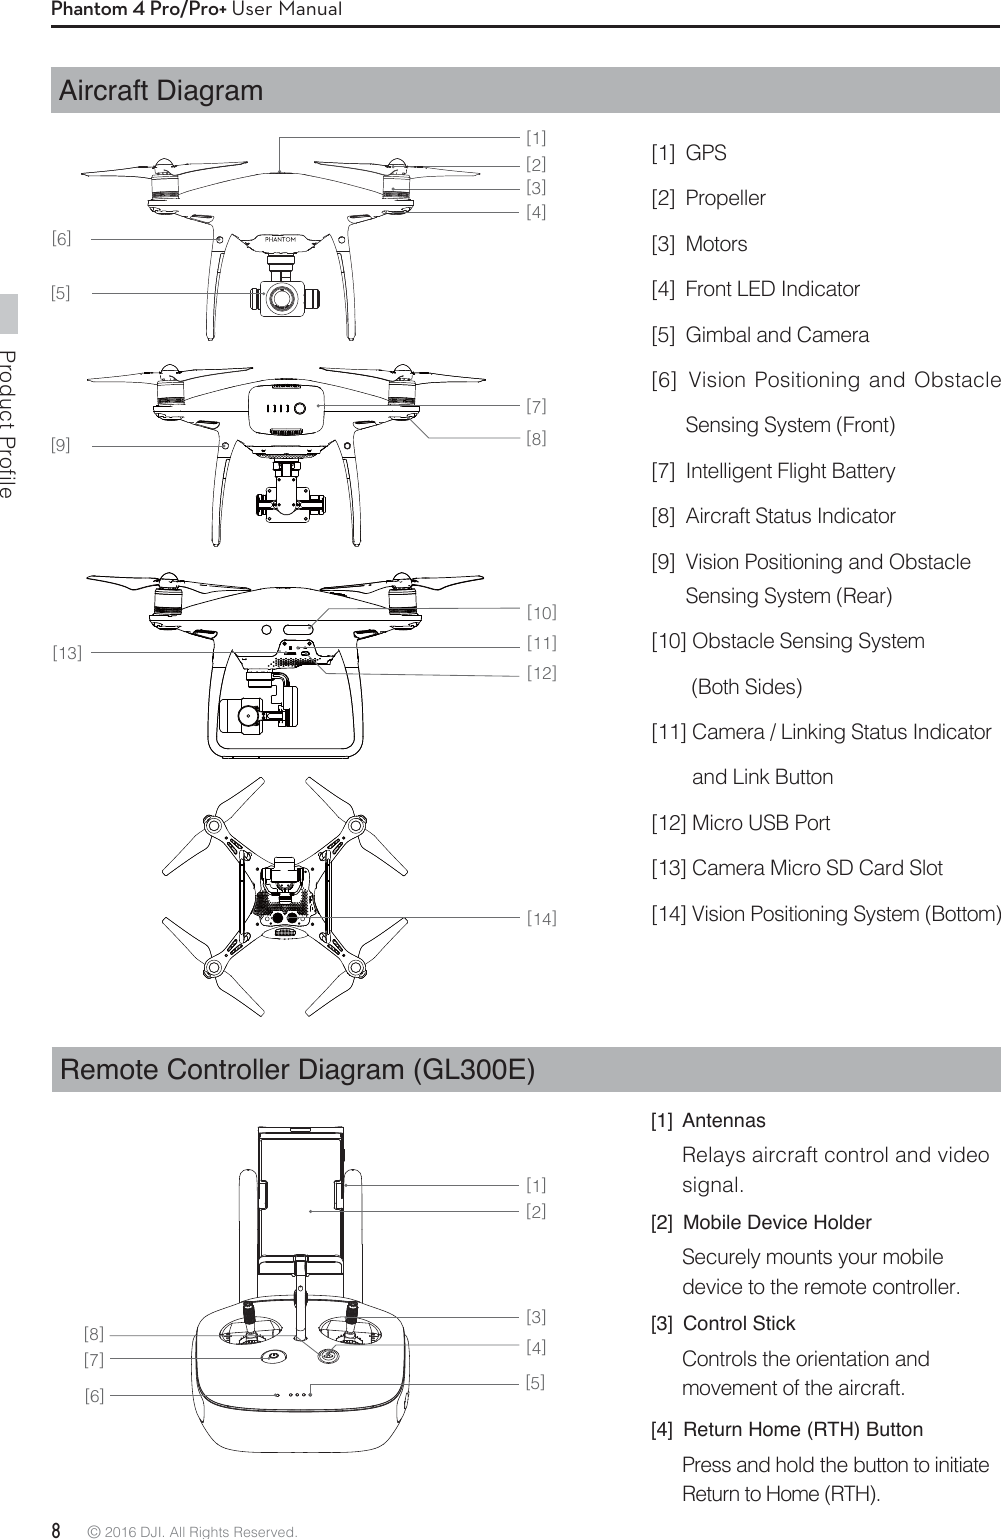 Product Profile8 © 2016 DJI. All Rights Reserved. Phantom 4 Pro/Pro+ User ManualAircraft DiagramRemote Controller Diagram (GL300E)[1] AntennasRelays aircraft control and video signal. [2]  Mobile Device HolderSecurely mounts your mobile device to the remote controller. [3] Control StickControls the orientation and movement of the aircraft.[4]  Return Home (RTH) ButtonPress and hold the button to initiate Return to Home (RTH).[1] GPS[2] Propeller [3] Motors[4]  Front LED Indicator[5]  Gimbal and Camera[6]  Vision Positioning and Obstacle Sensing System (Front) [7]  Intelligent Flight Battery [8]  Aircraft Status Indicator[9]  Vision Positioning and Obstacle Sensing System (Rear)[10] Obstacle Sensing System(Both Sides)[11] Camera / Linking Status Indicator and Link Button [12] Micro USB Port[13] Camera Micro SD Card Slot[14] Vision Positioning System (Bottom)[1][2][3][4][7][8][11][10][14][12][13][5][9][6][1][2][3][4][5][7][8][6]